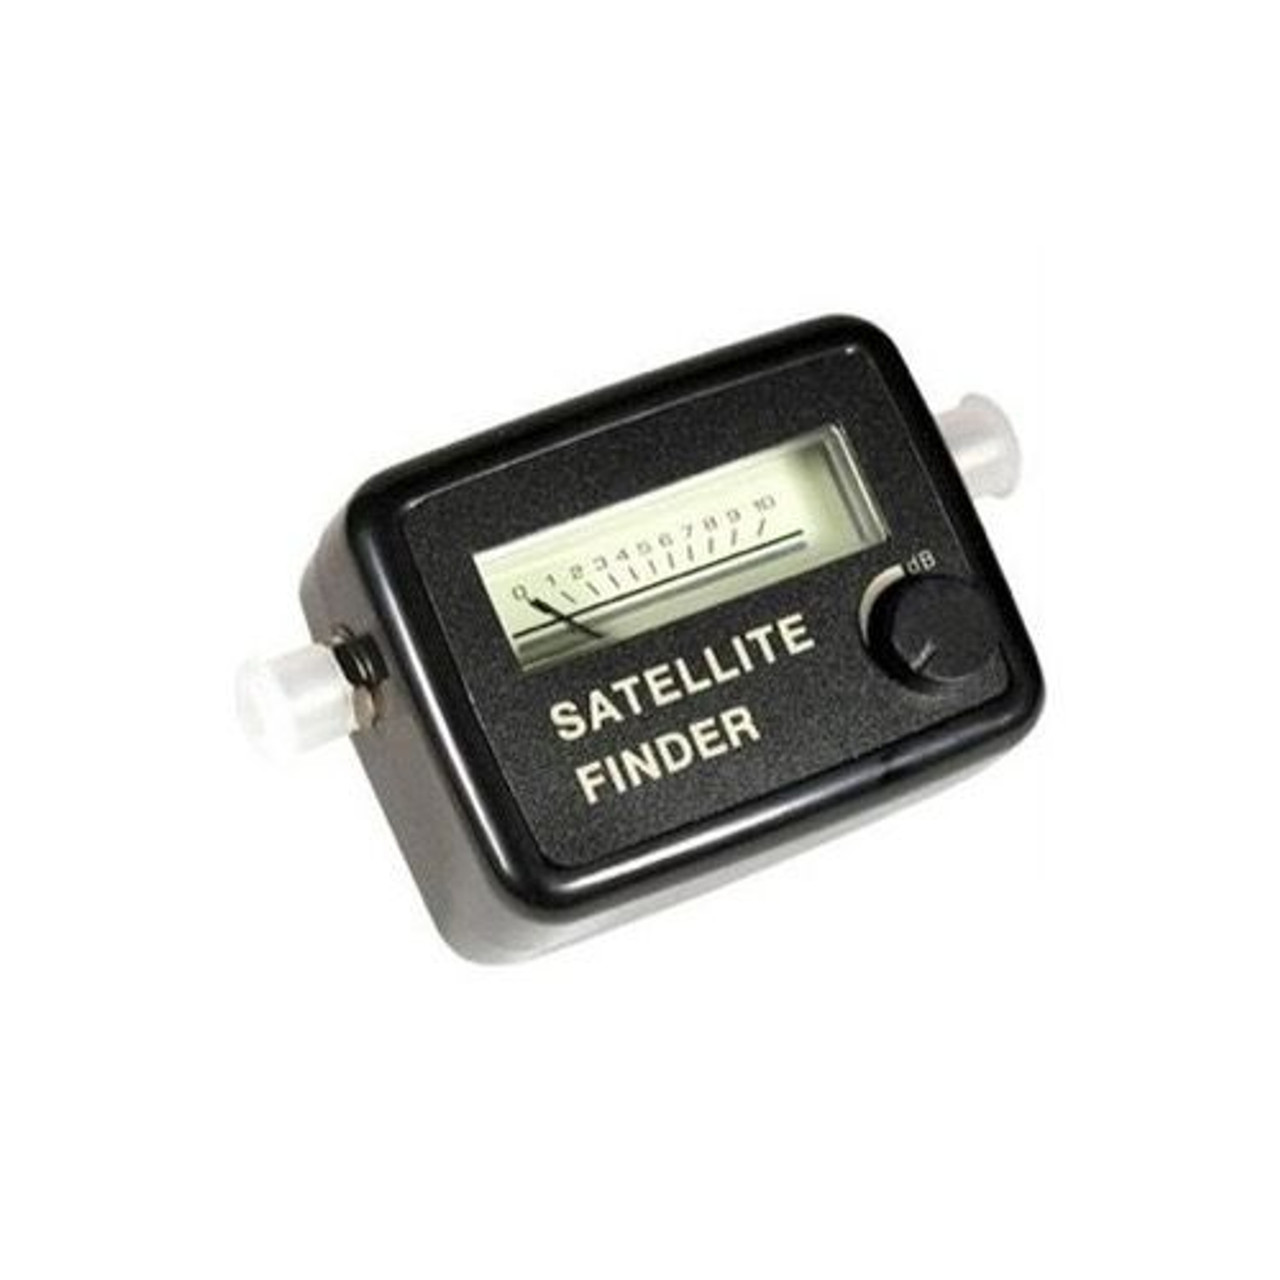 Lava Electronics SF-20 Satellite Signal Meter SF-95 TV Antenna Dish Strength Squawker / Finder / Locator Tester, DirecTV Dish Network, 2 GHz, 13 - 18 VDC, 75 Ohm, Part # SF95, SF20